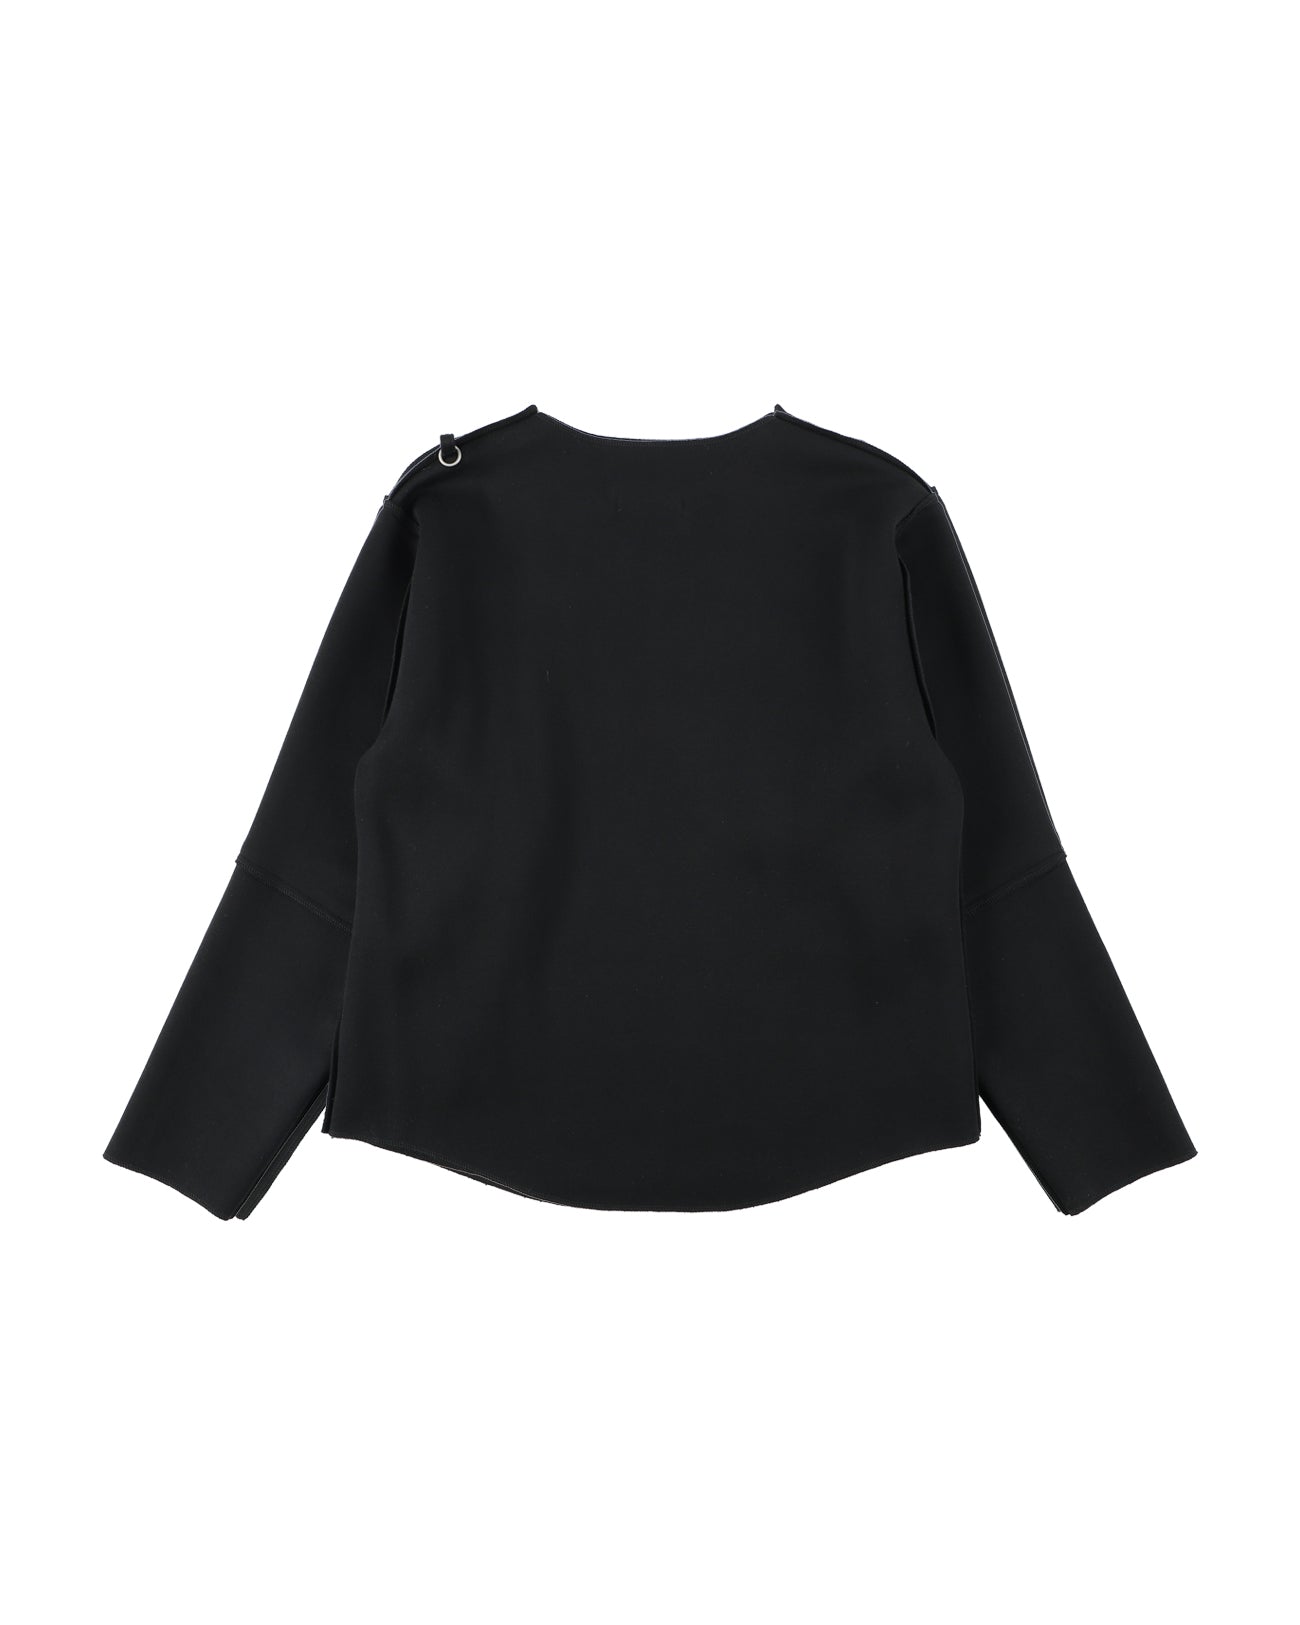 stitch pull over - black - FAB4 ONLINE STORE